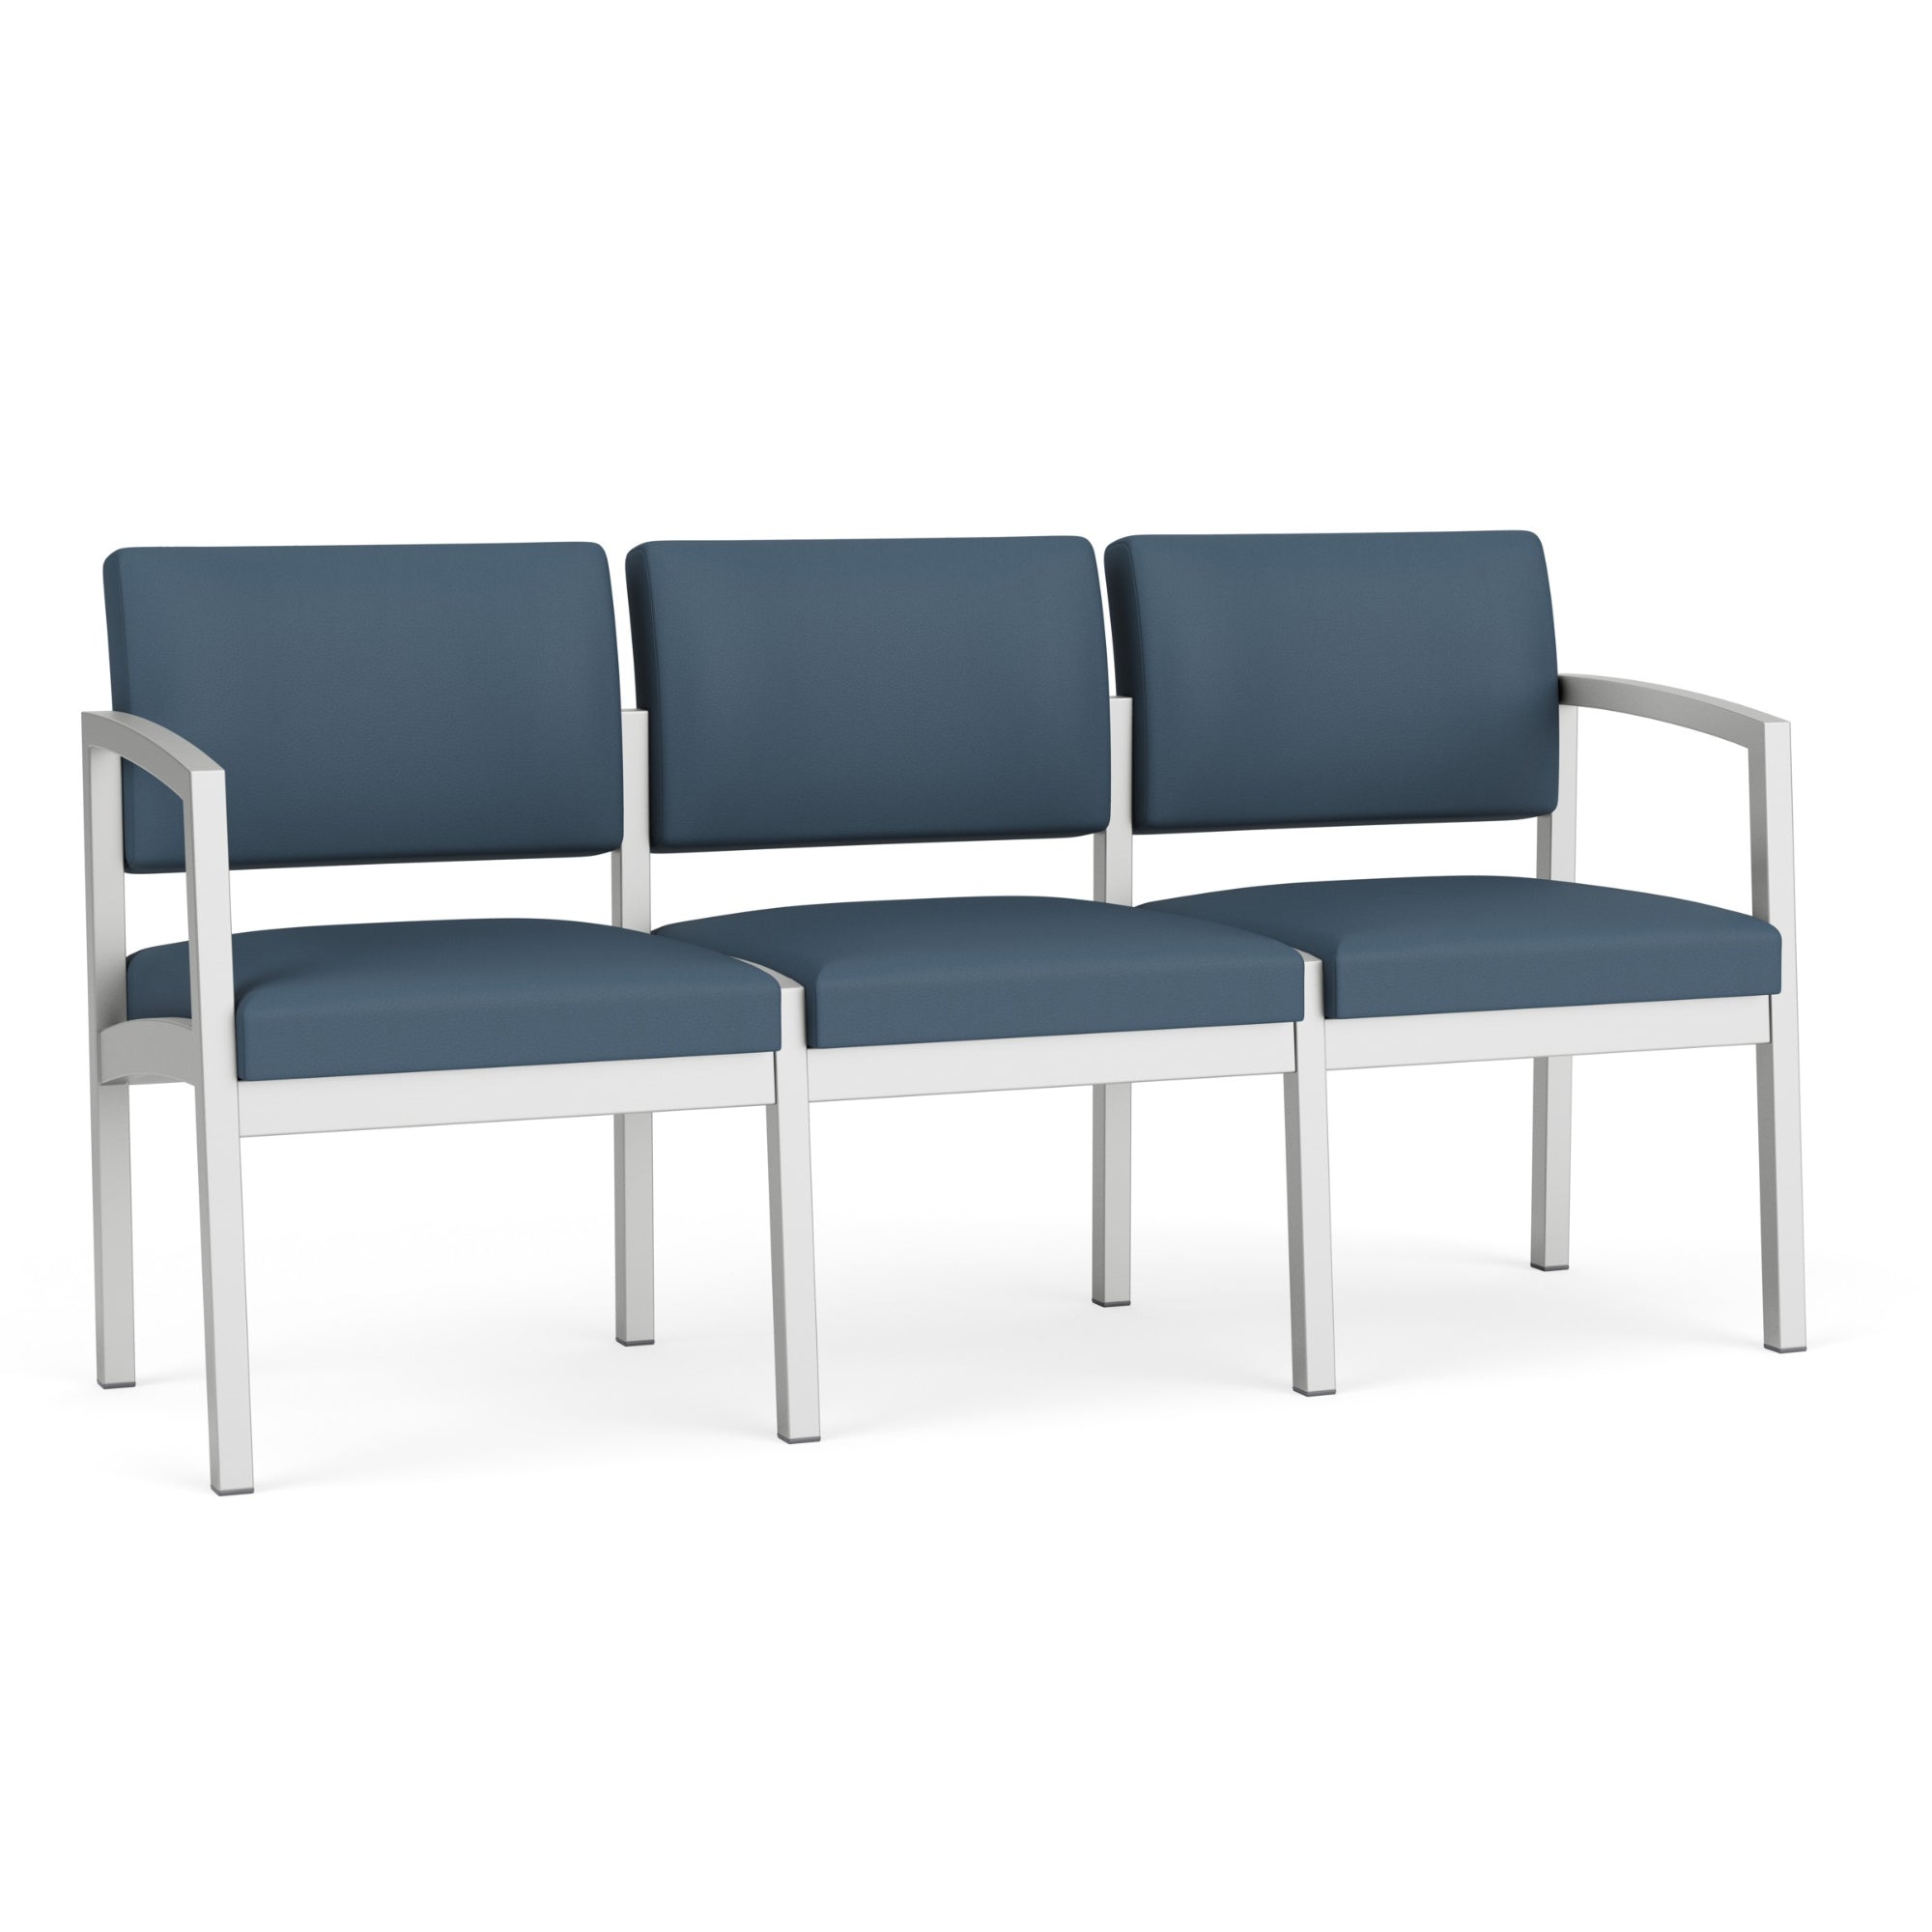 Lenox Steel Collection Reception Seating, 3 Seat Sofa, Standard Vinyl Upholstery, FREE SHIPPING